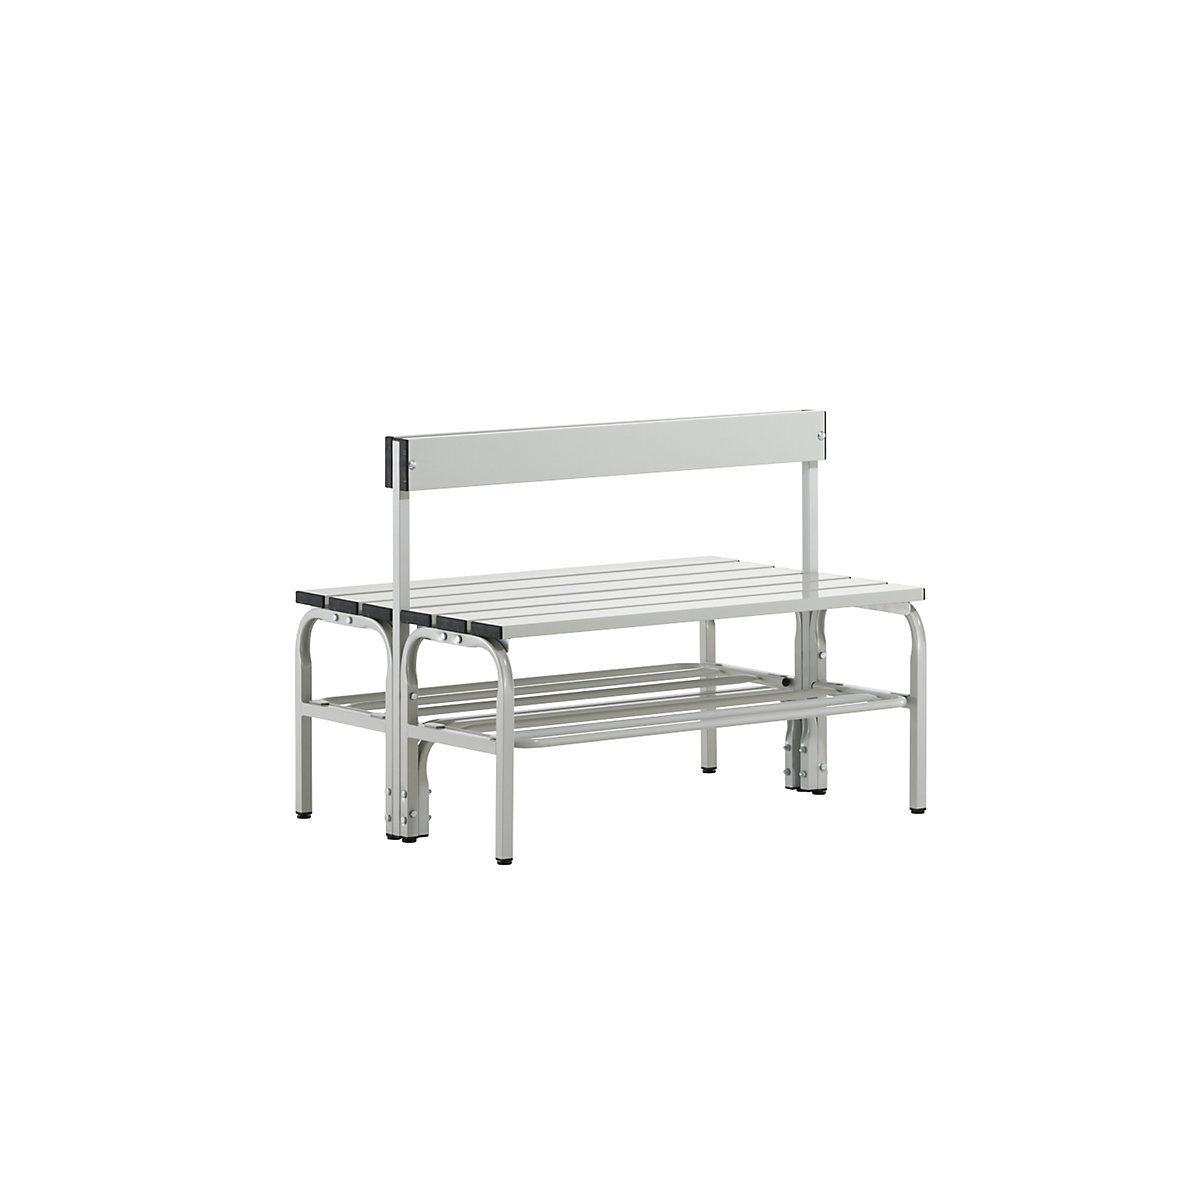 Half height cloakroom bench with back rest, double sided – Sypro, aluminium, length 1015 mm, light grey, shoe rack